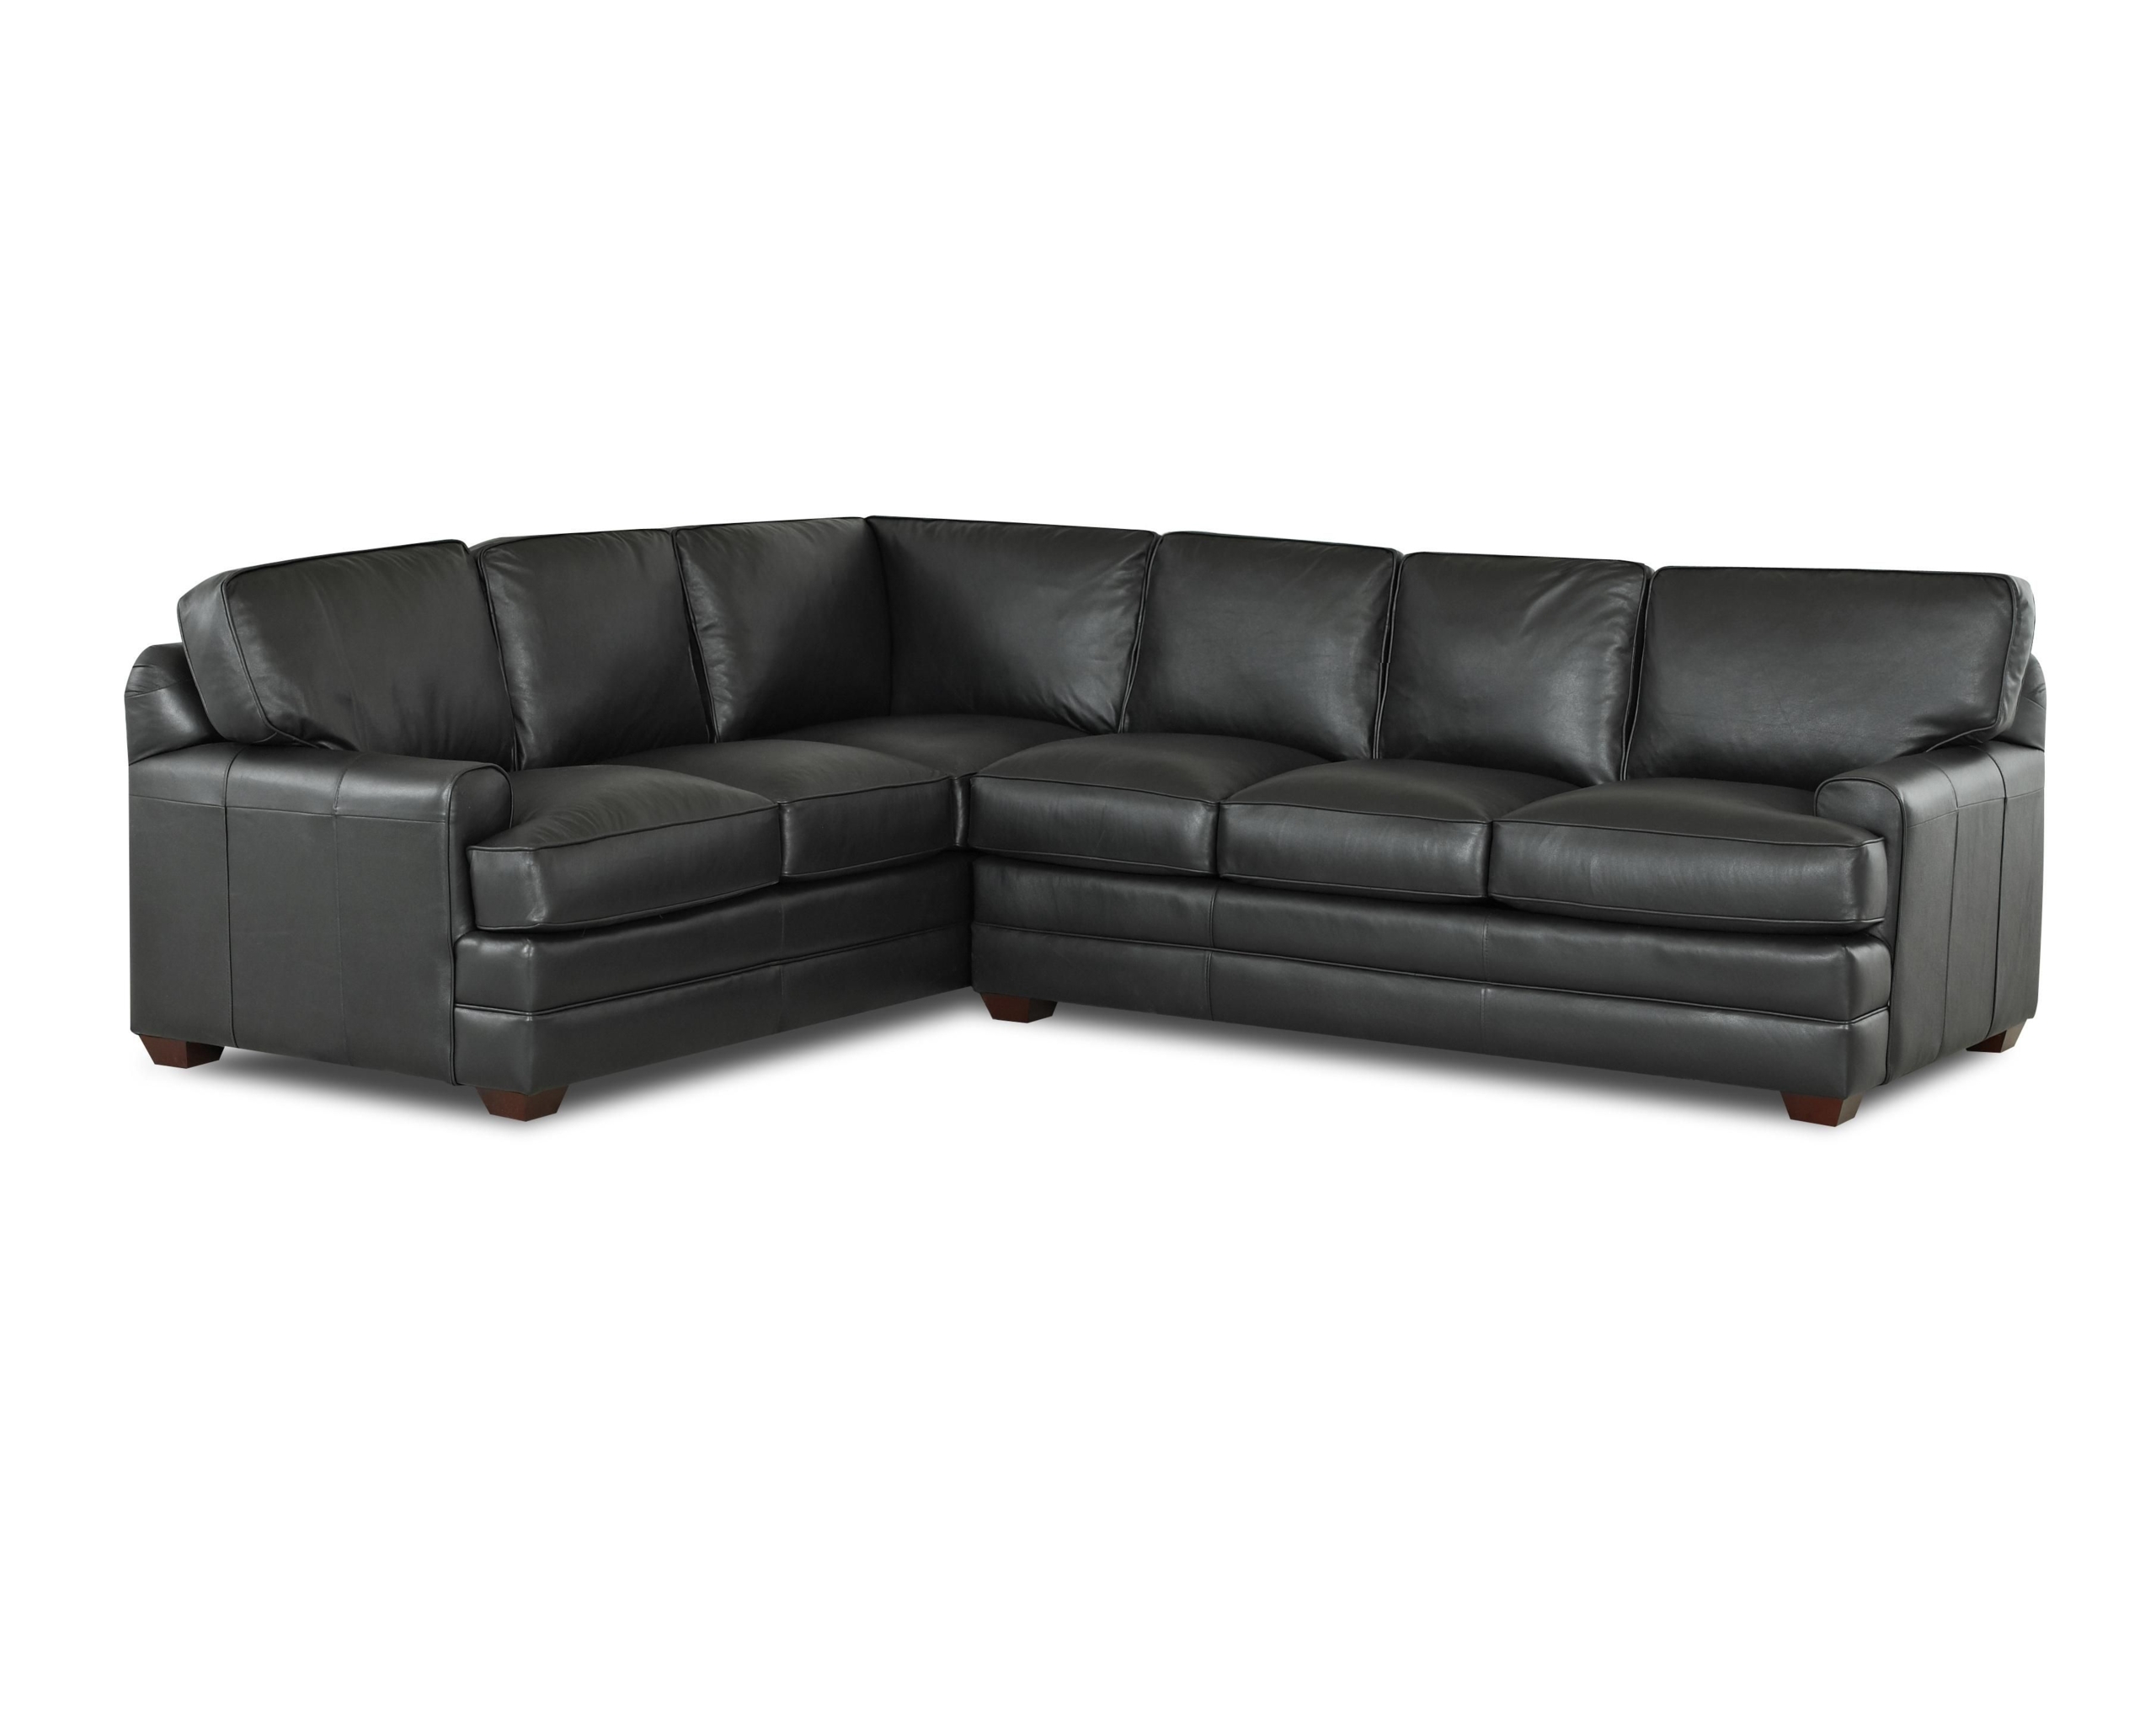 Leather sectional sofa with sleeper 1